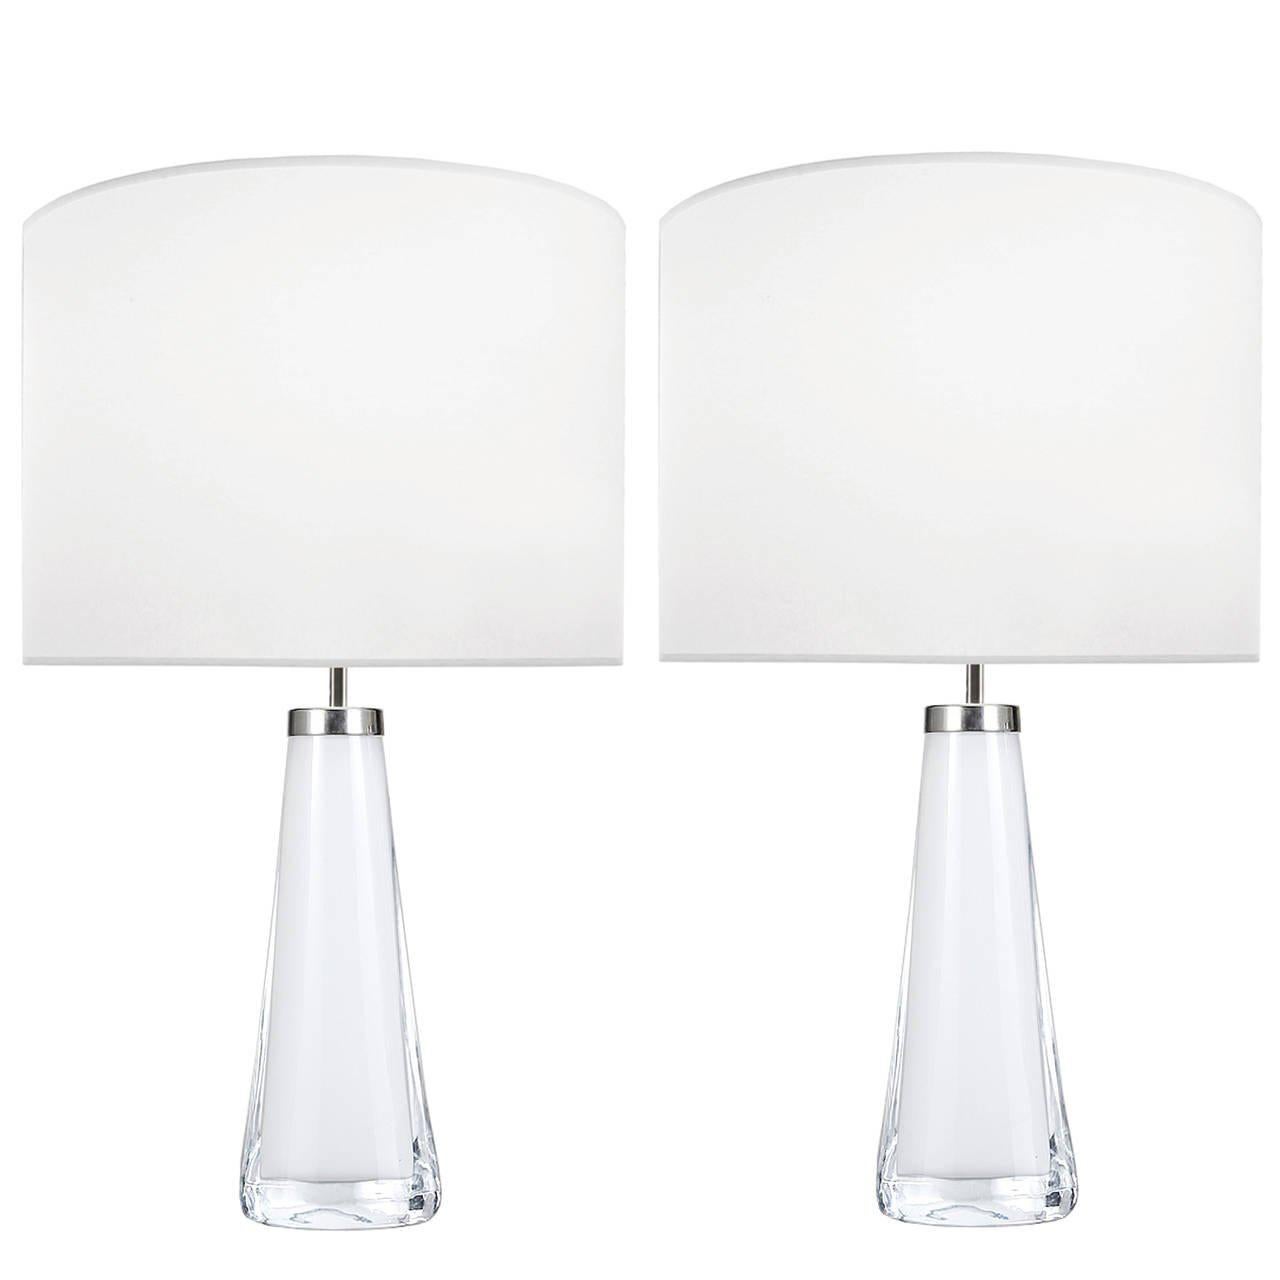 Pair of Nils Landberg for Orrefors White Glass Lamps In Excellent Condition For Sale In New York, NY